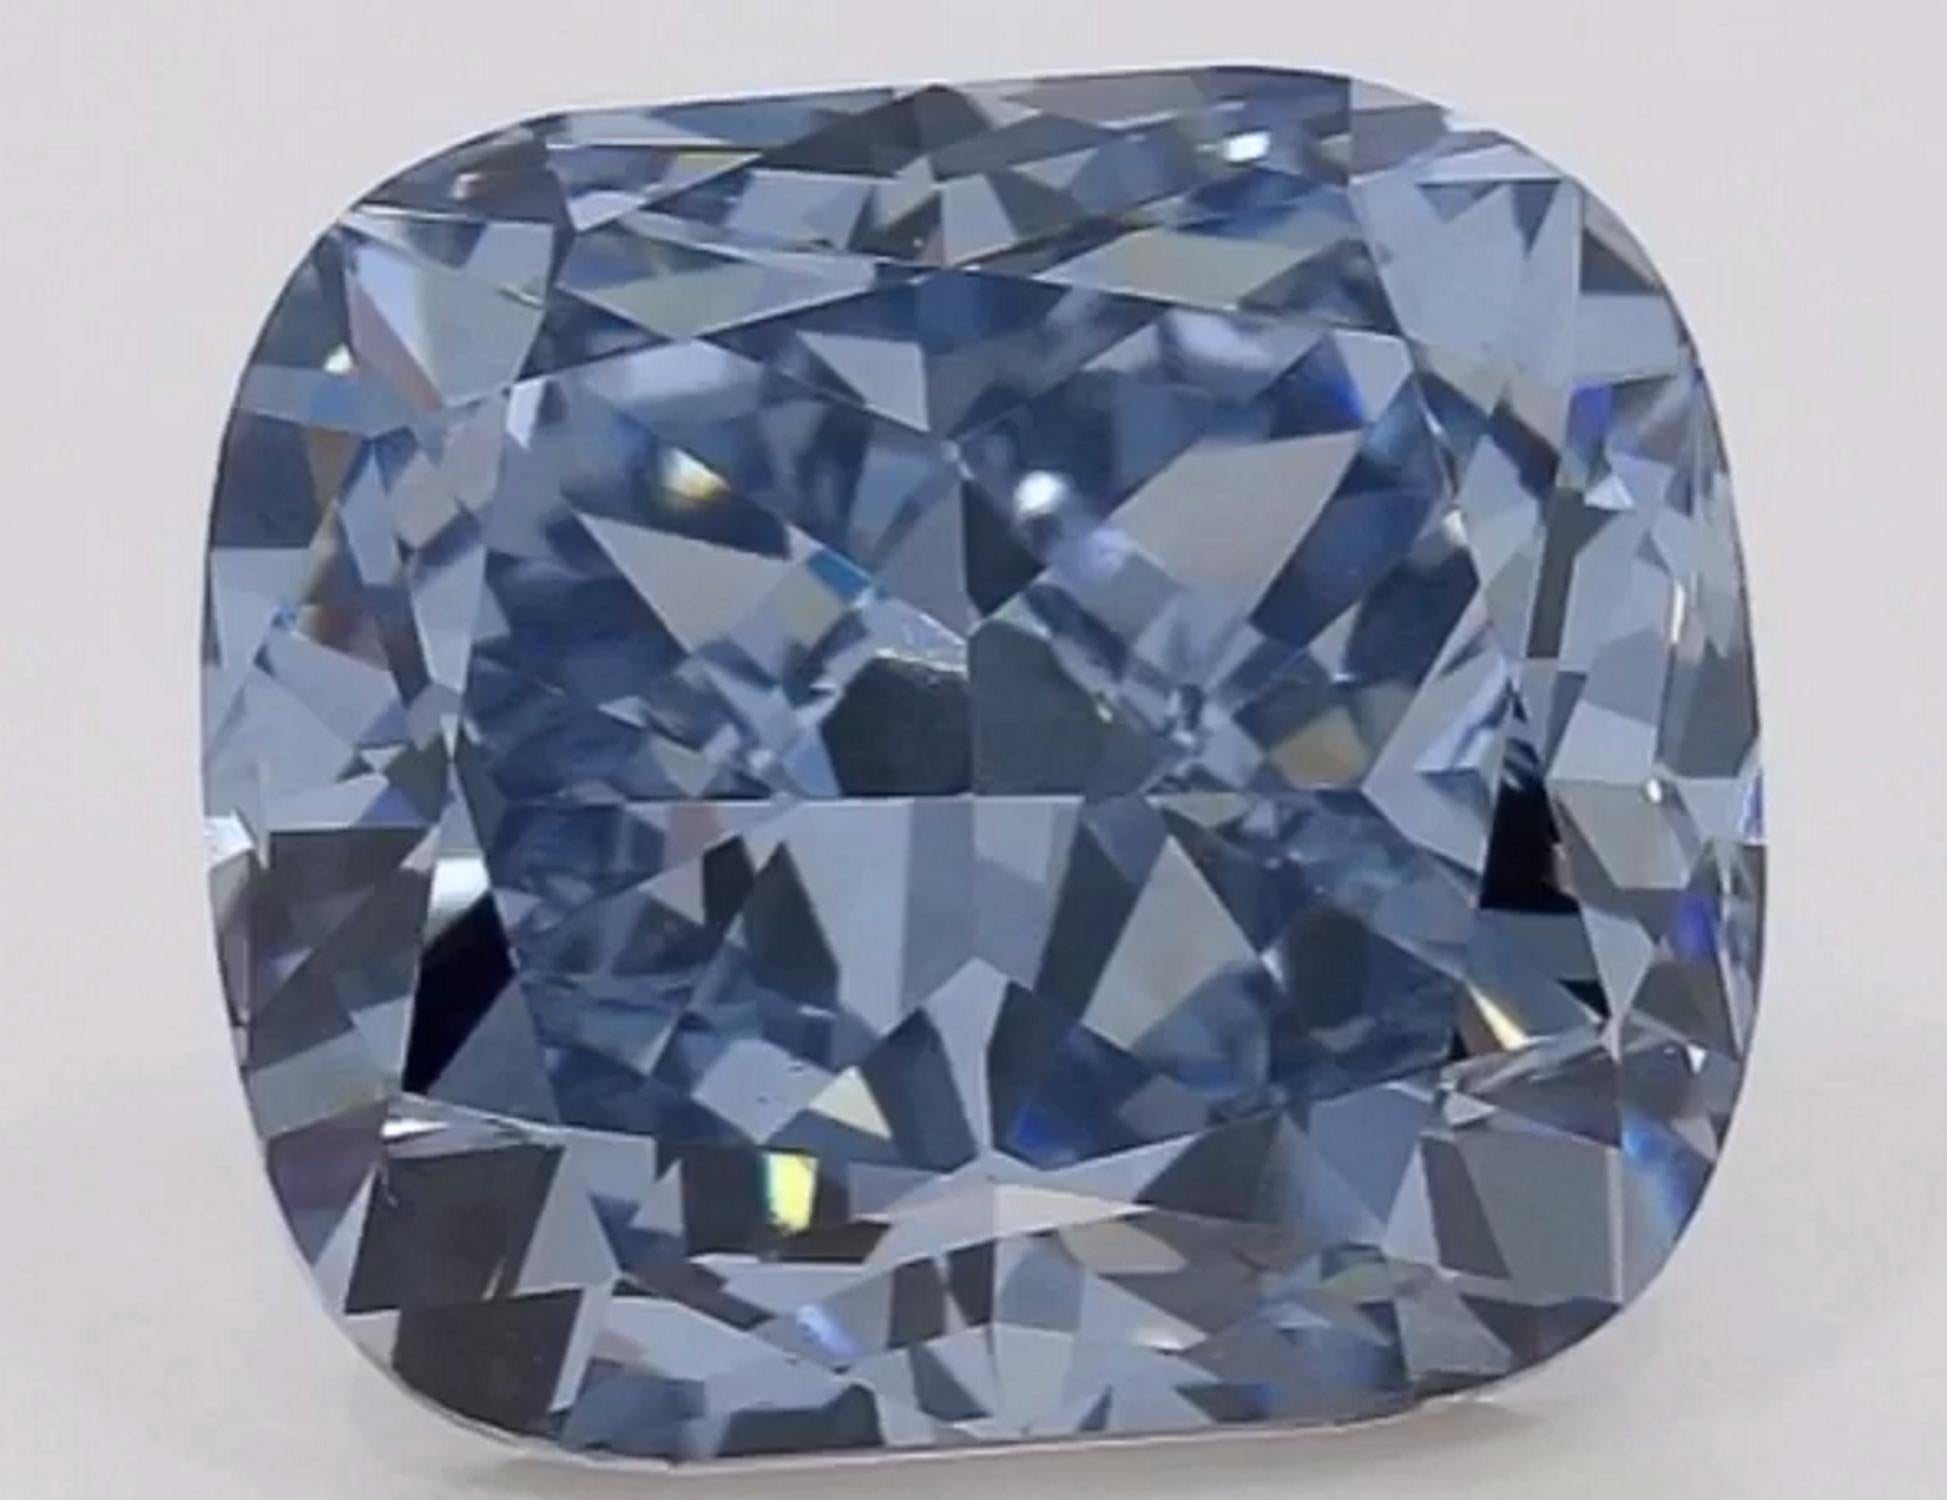 The blue diamond market has always been strong, stable, and worthy of investment. The market has an insatiable appetite for fancy colored diamonds in general, and blues in particular - especially since they are among the rarest of colors. This makes